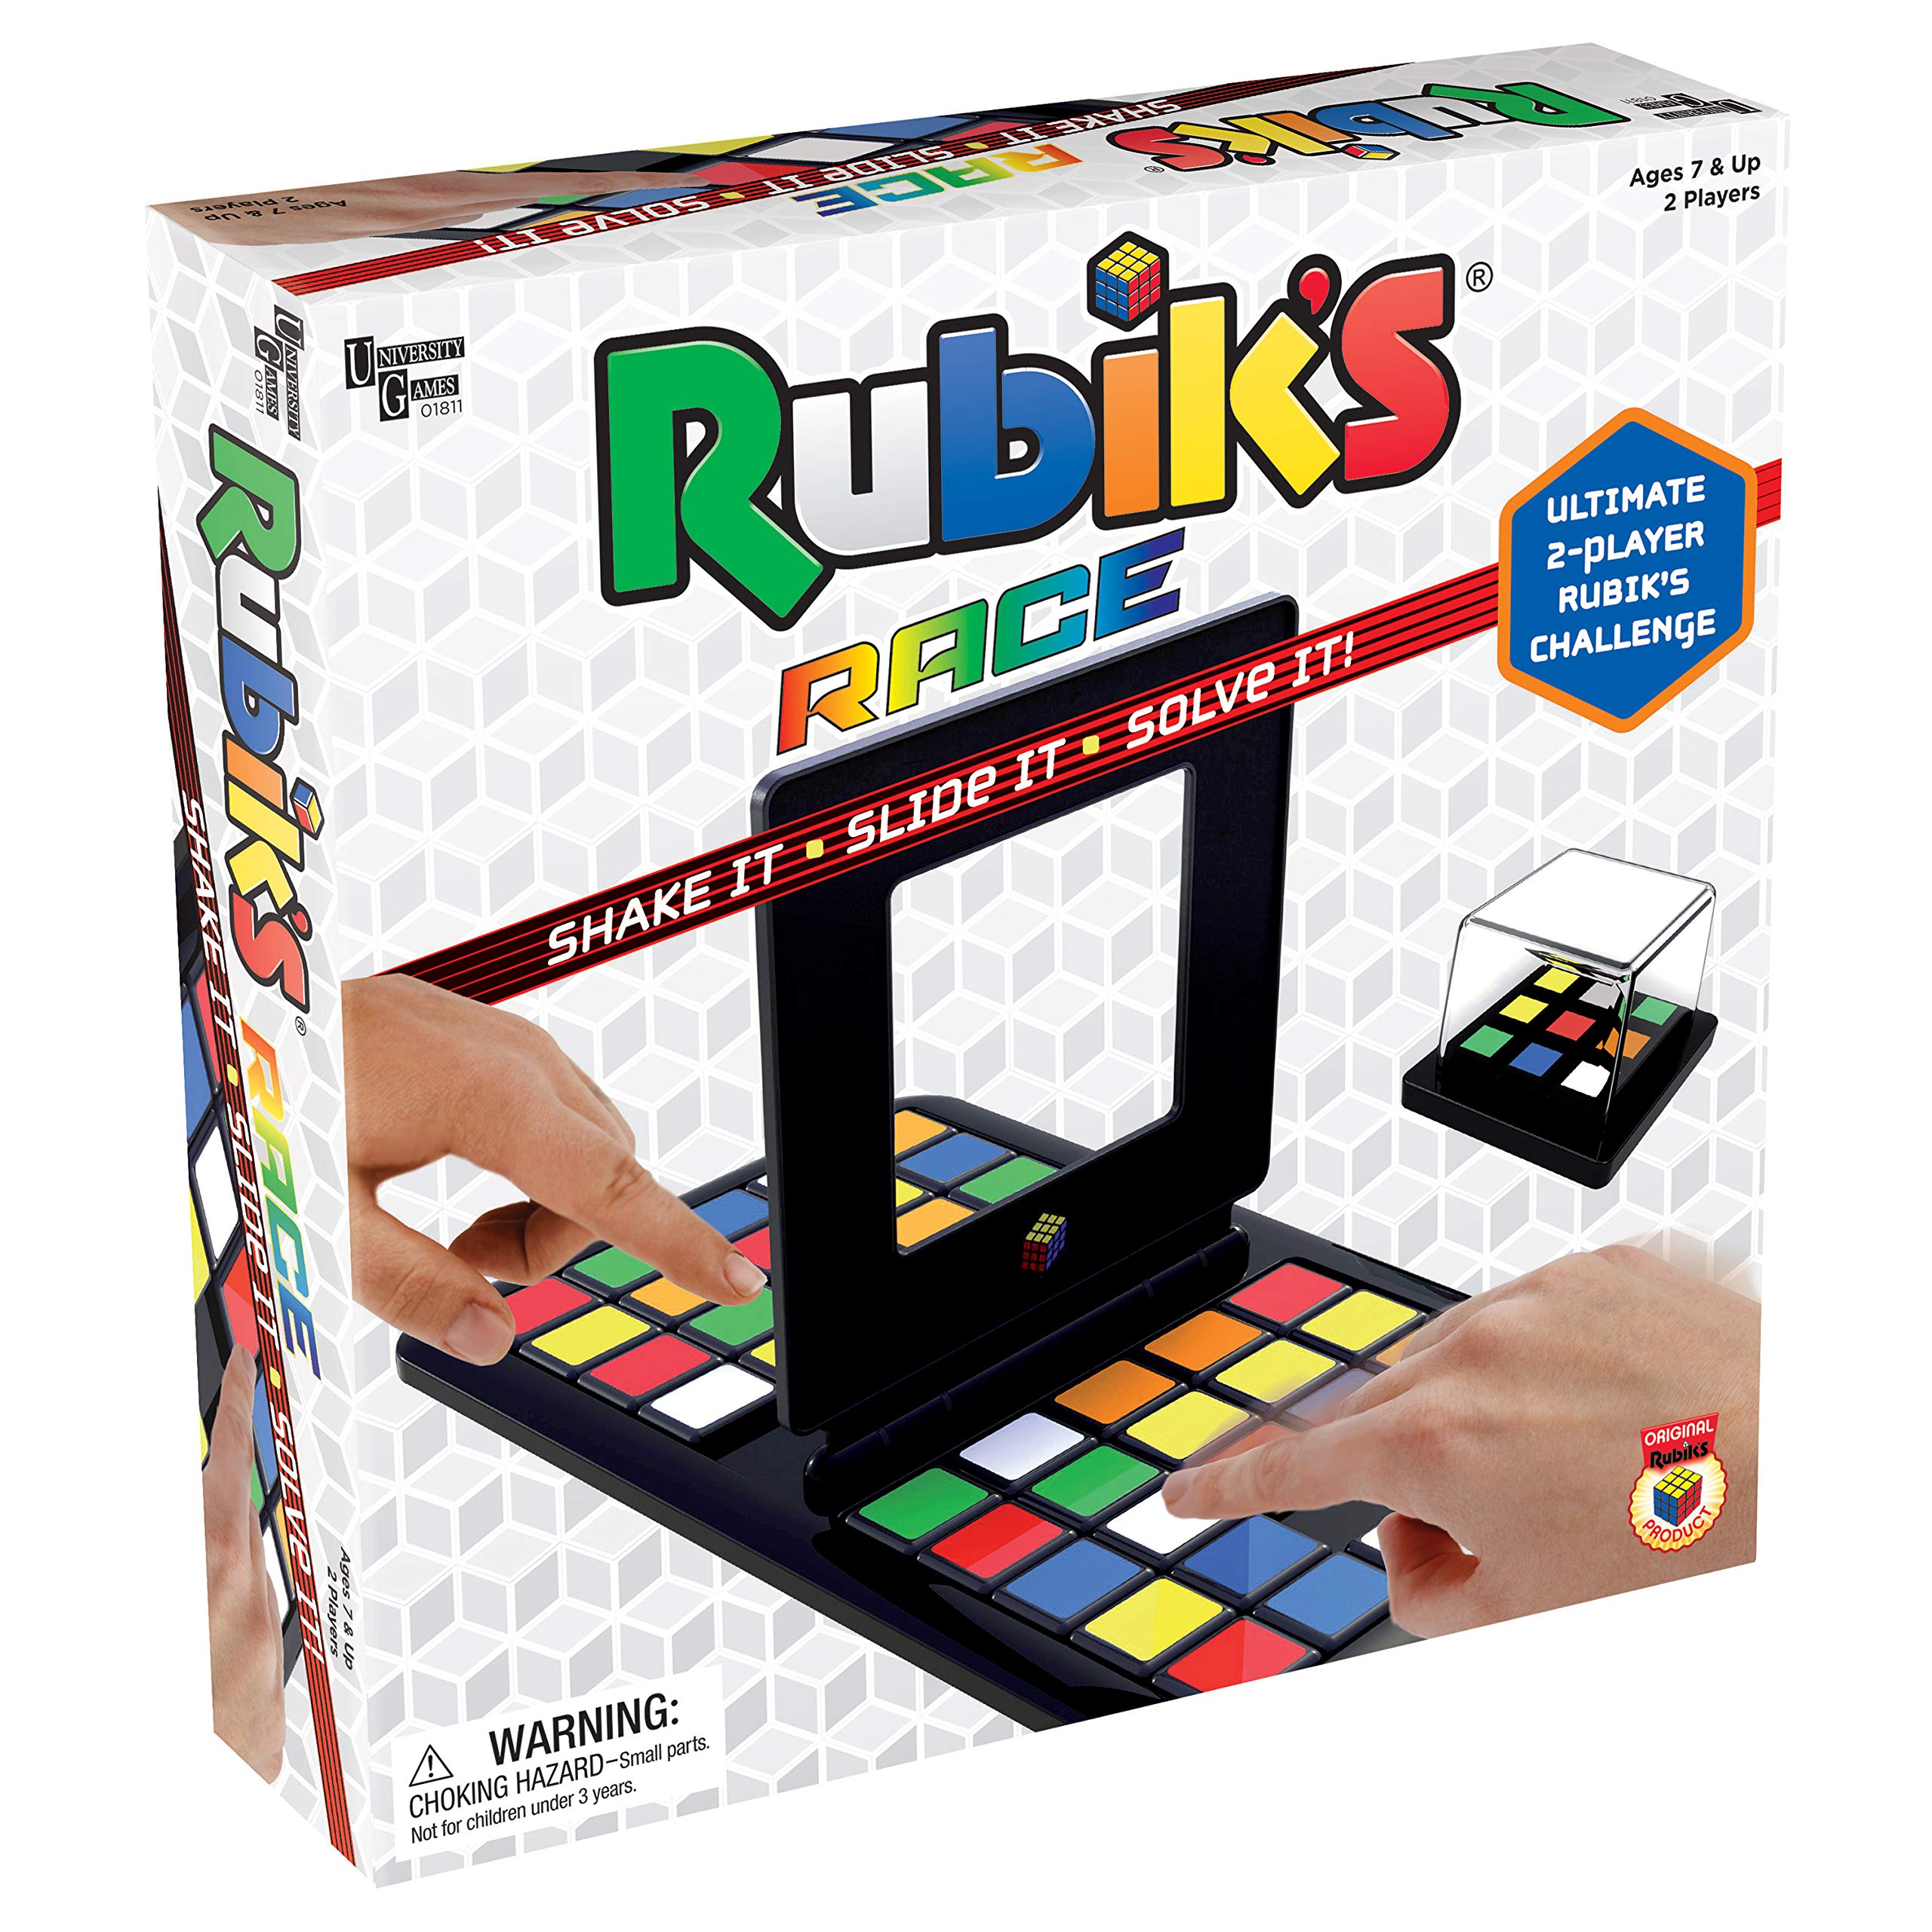 Rubik's Race Game, Head To Head Fast Paced Square Shifting Board Game Based On The Famous Rubiks Cube, For Family Game Night, Fun For Adults & Kids Ages 7 & Up